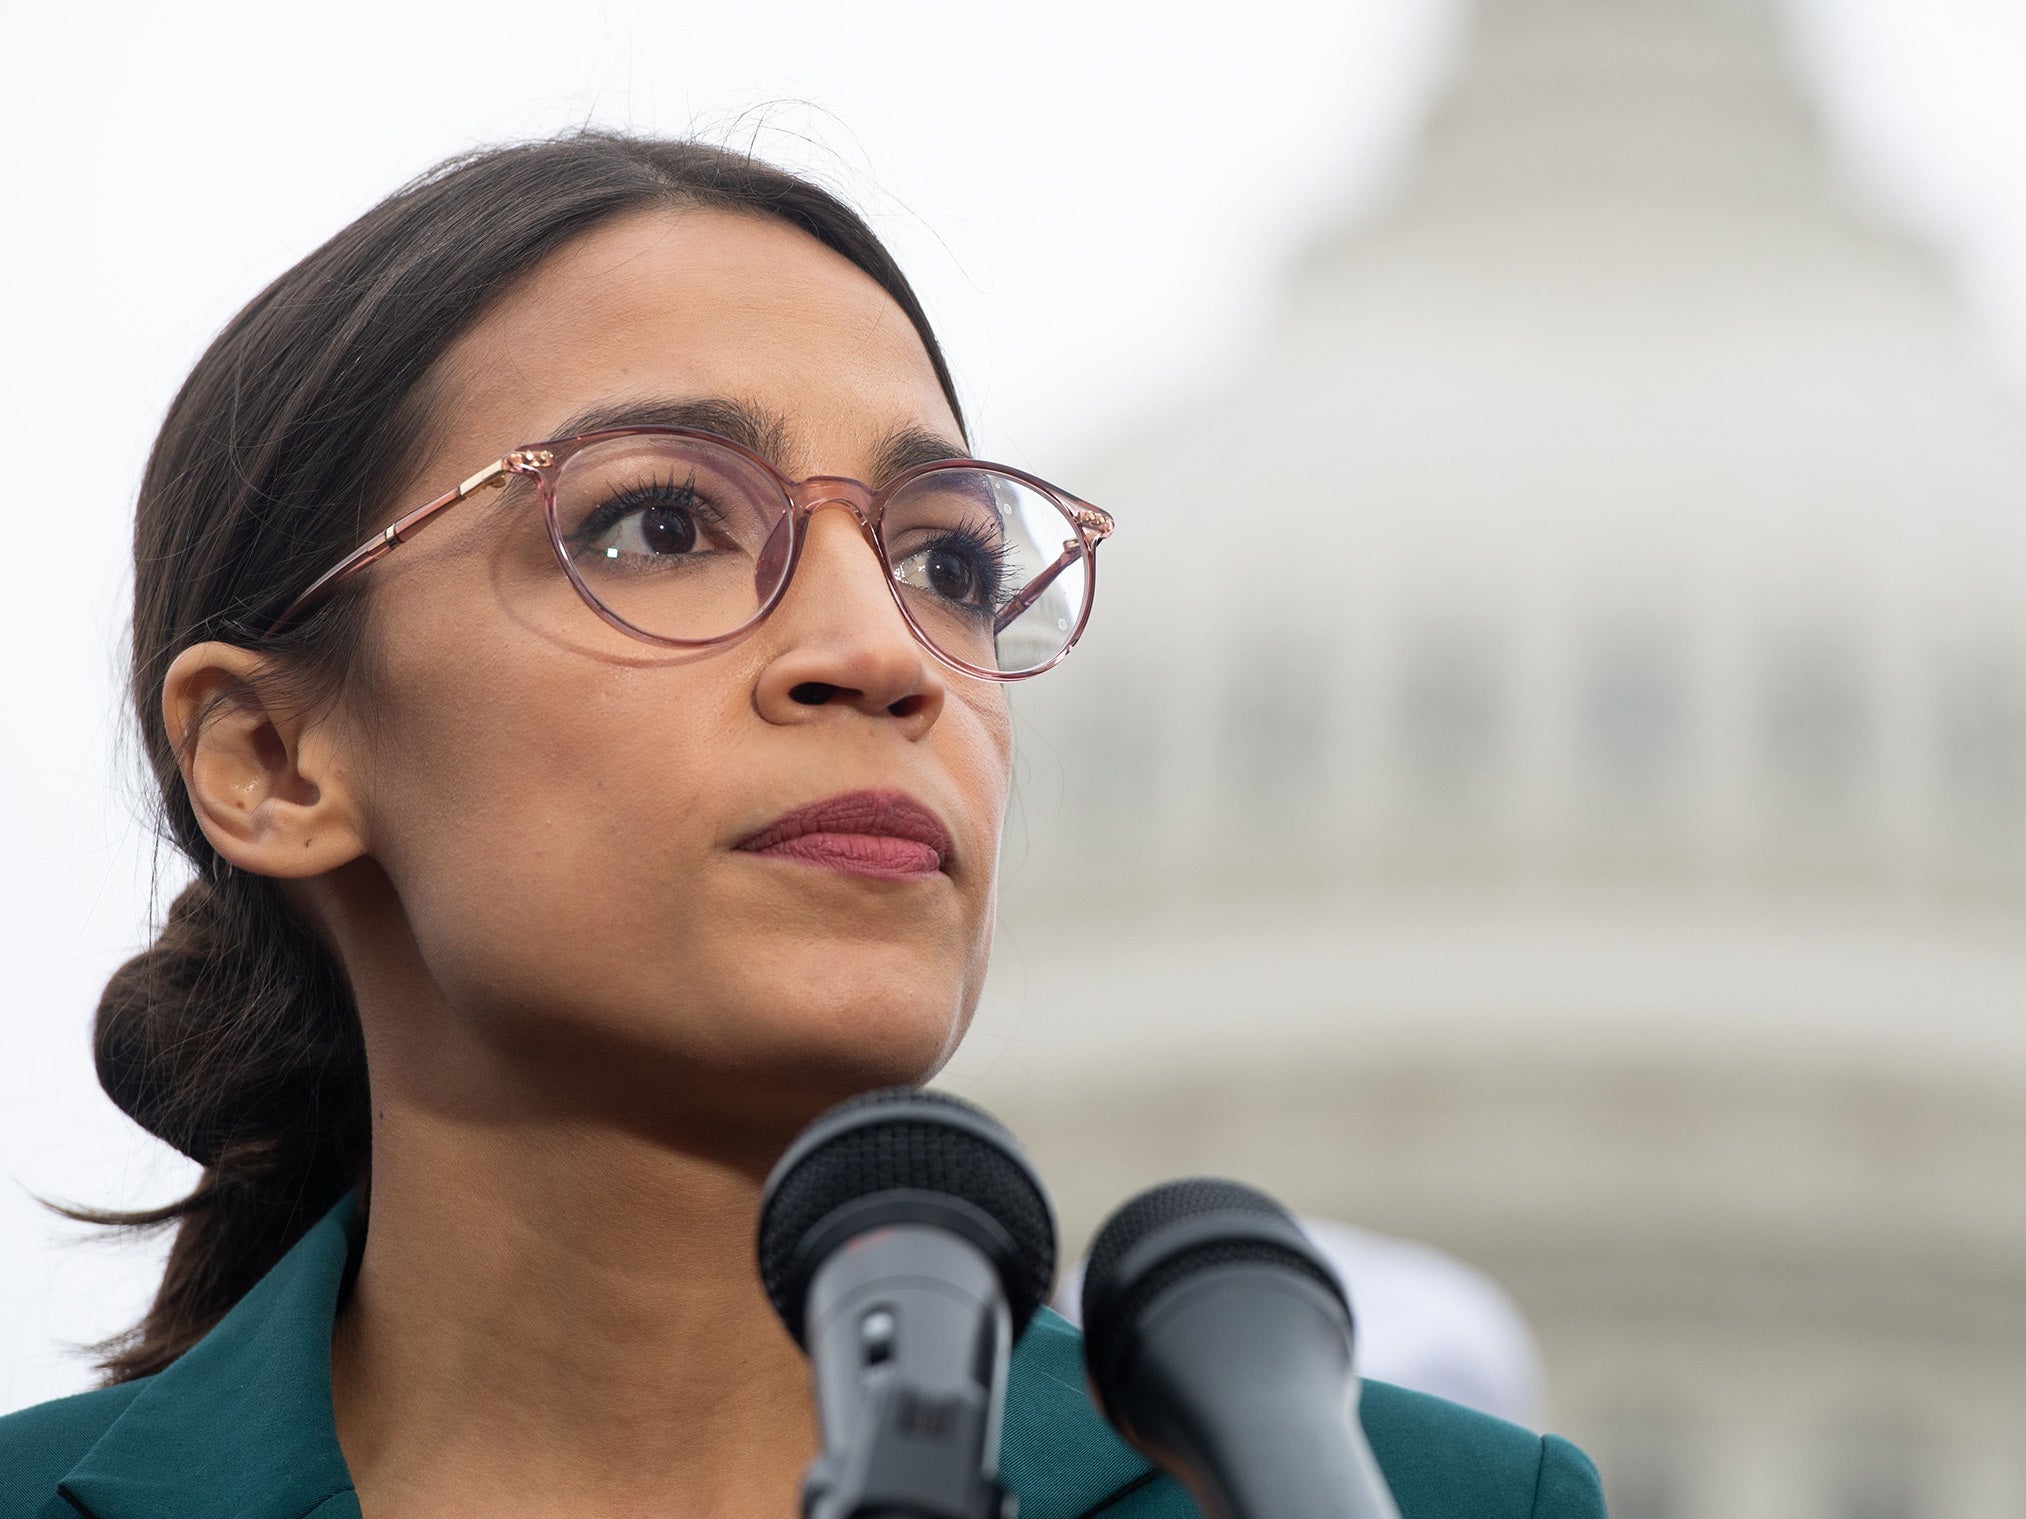 AOC's additions played right into Republicans' hands